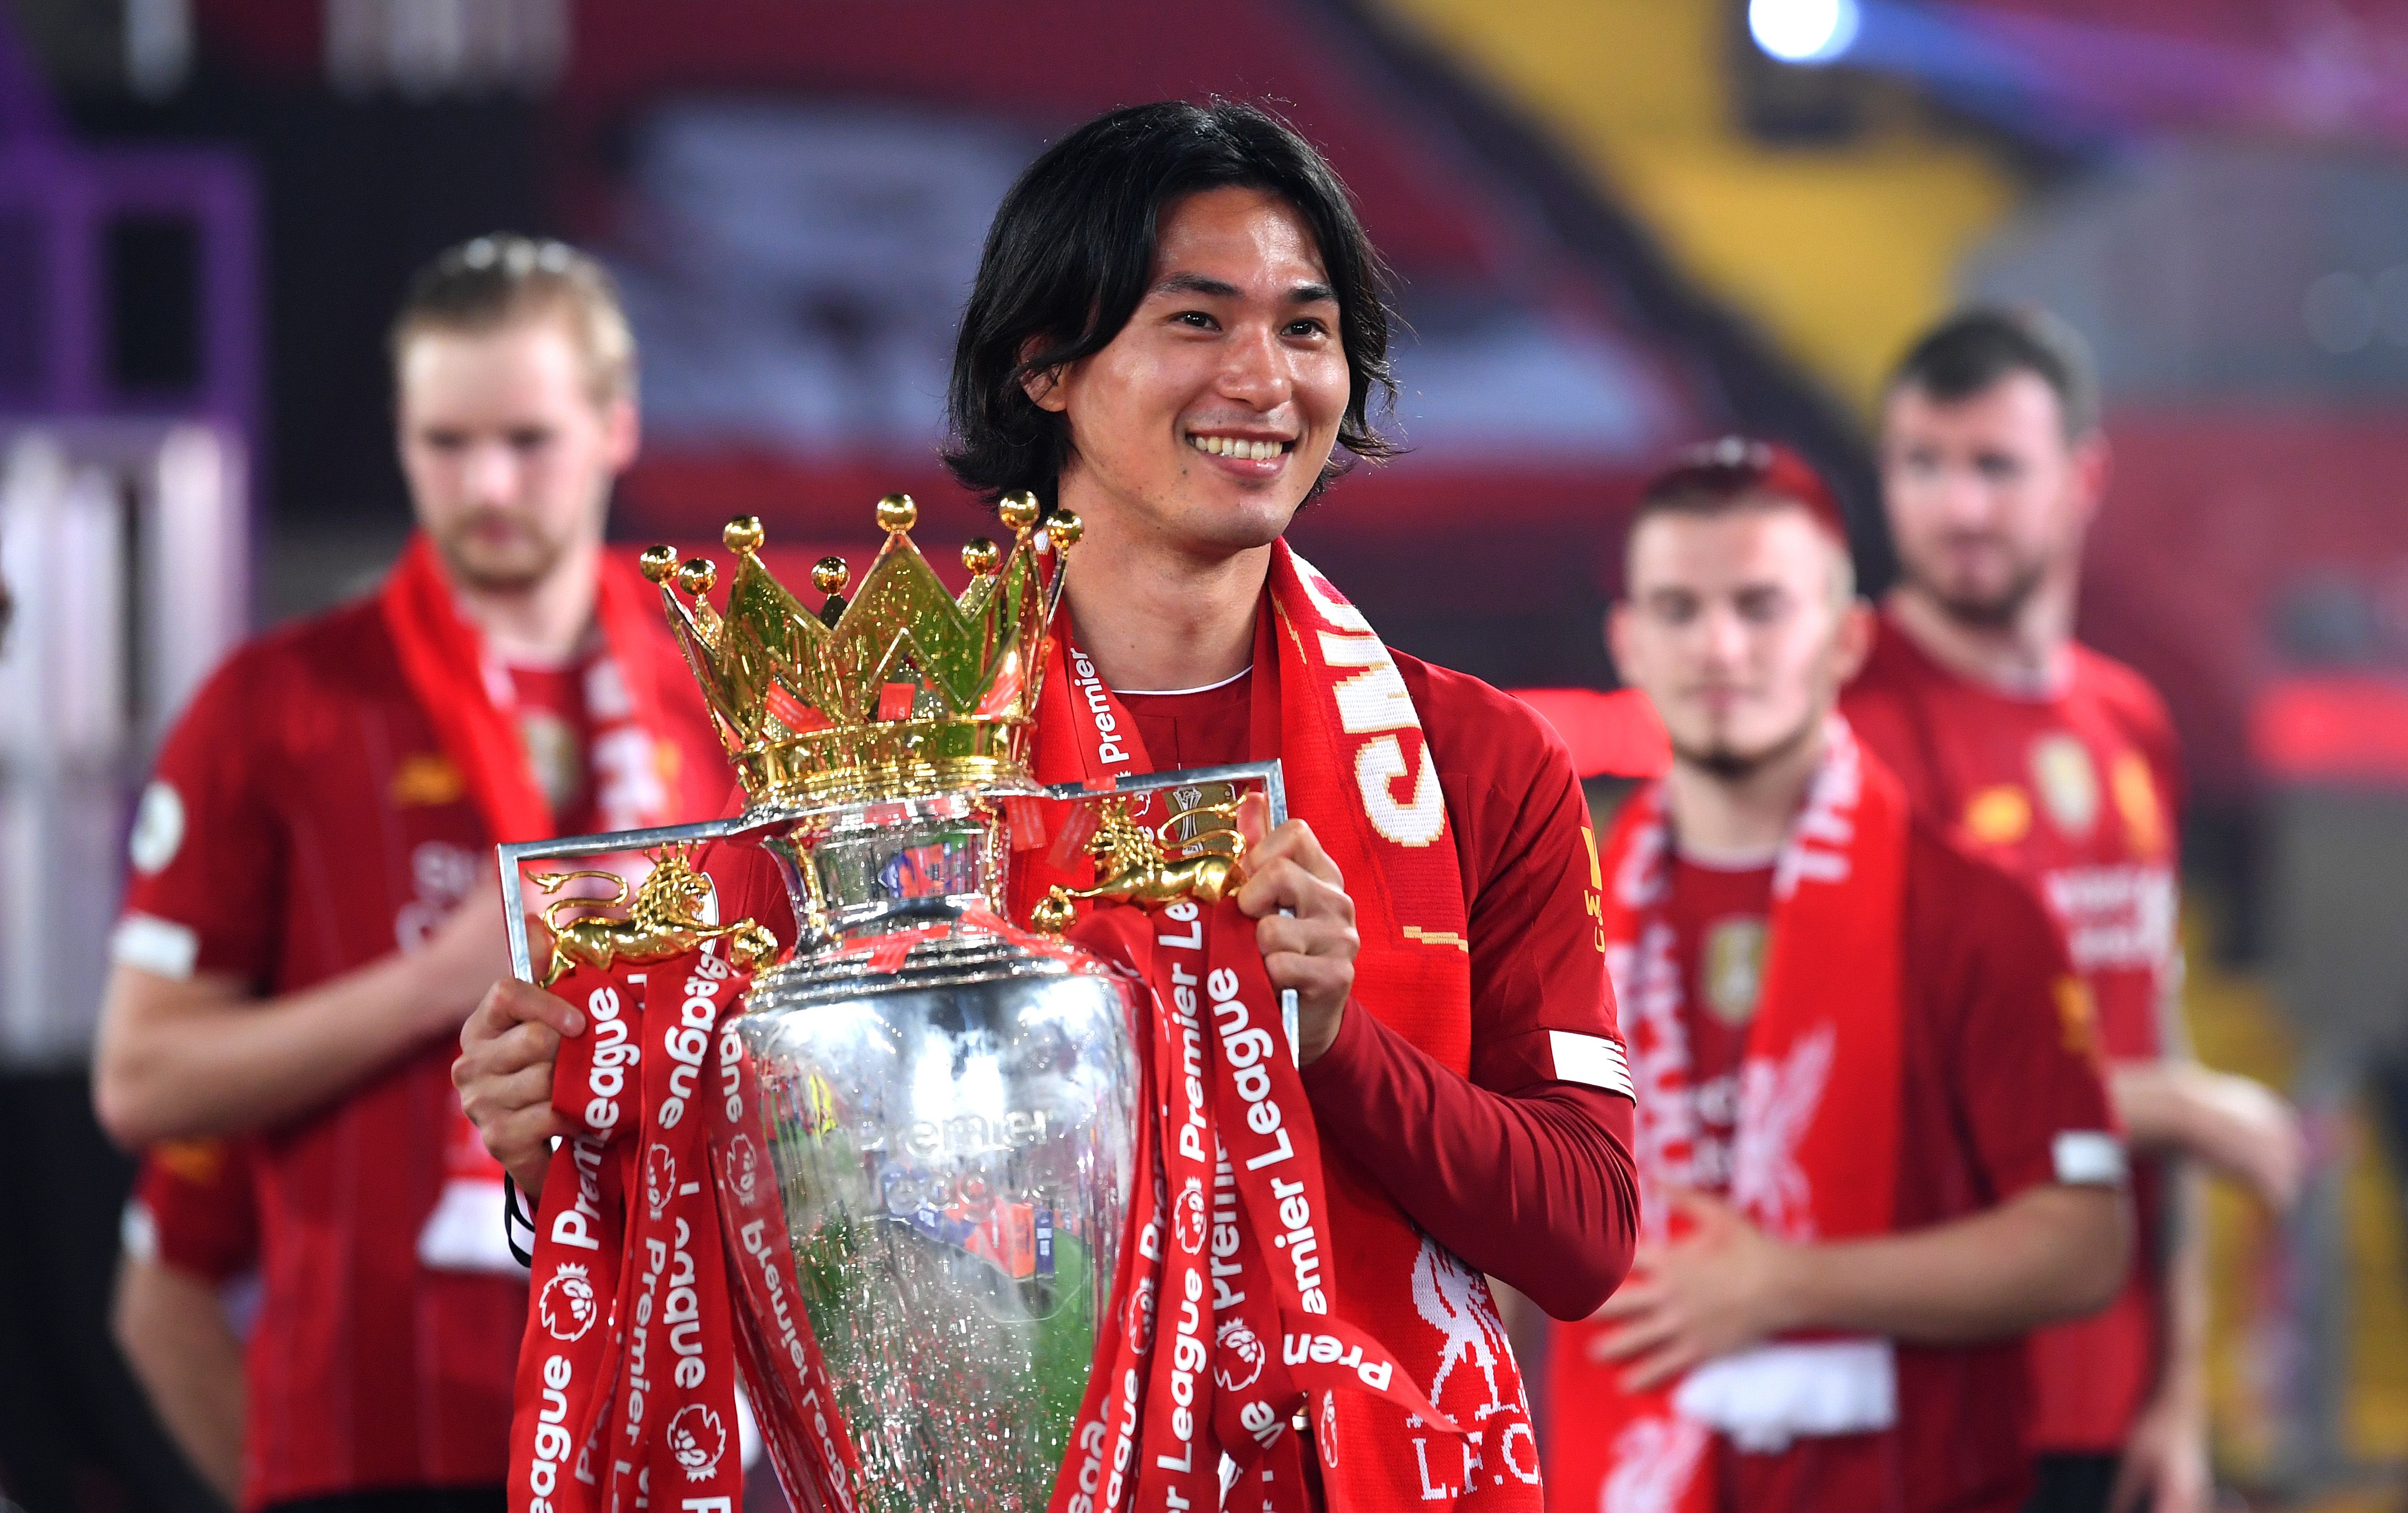 Takumi Minamino lifts the Premier League trophy as a Liverpool player